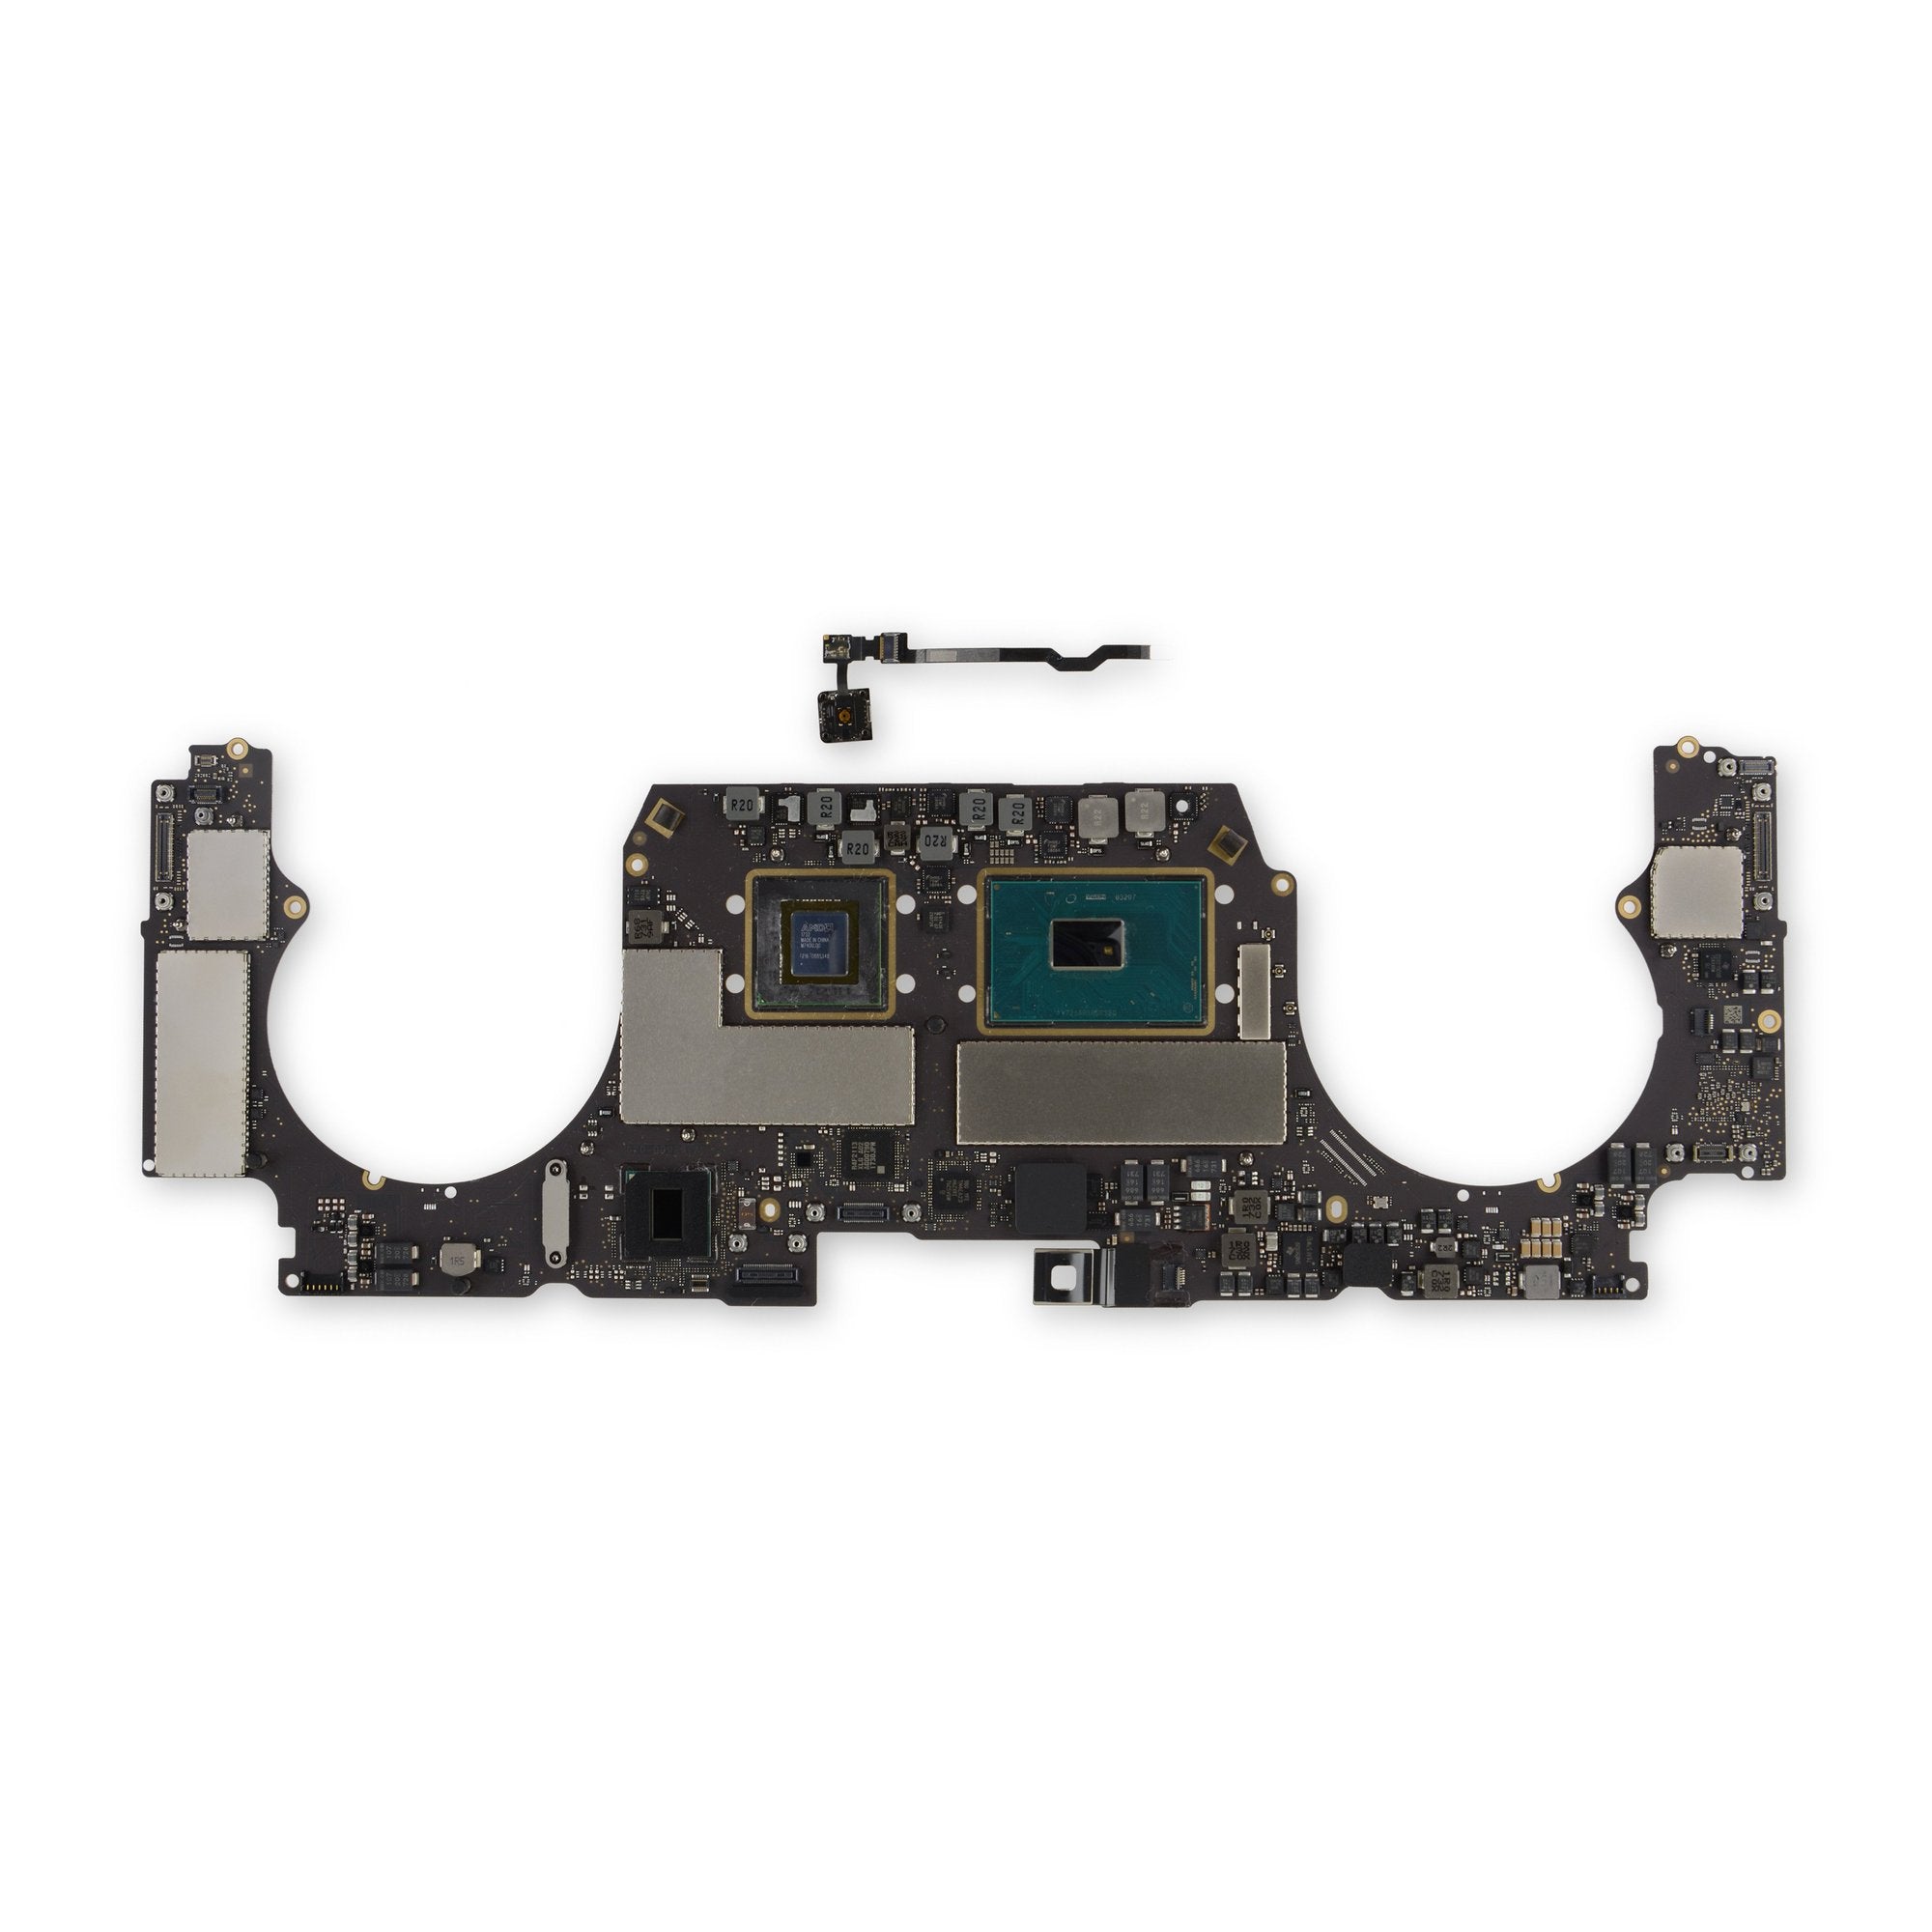 MacBook Pro 15" Retina (2017) 2.9 GHz Logic Board, Radeon Pro 560, with Paired Touch ID Sensor 512 GB Used